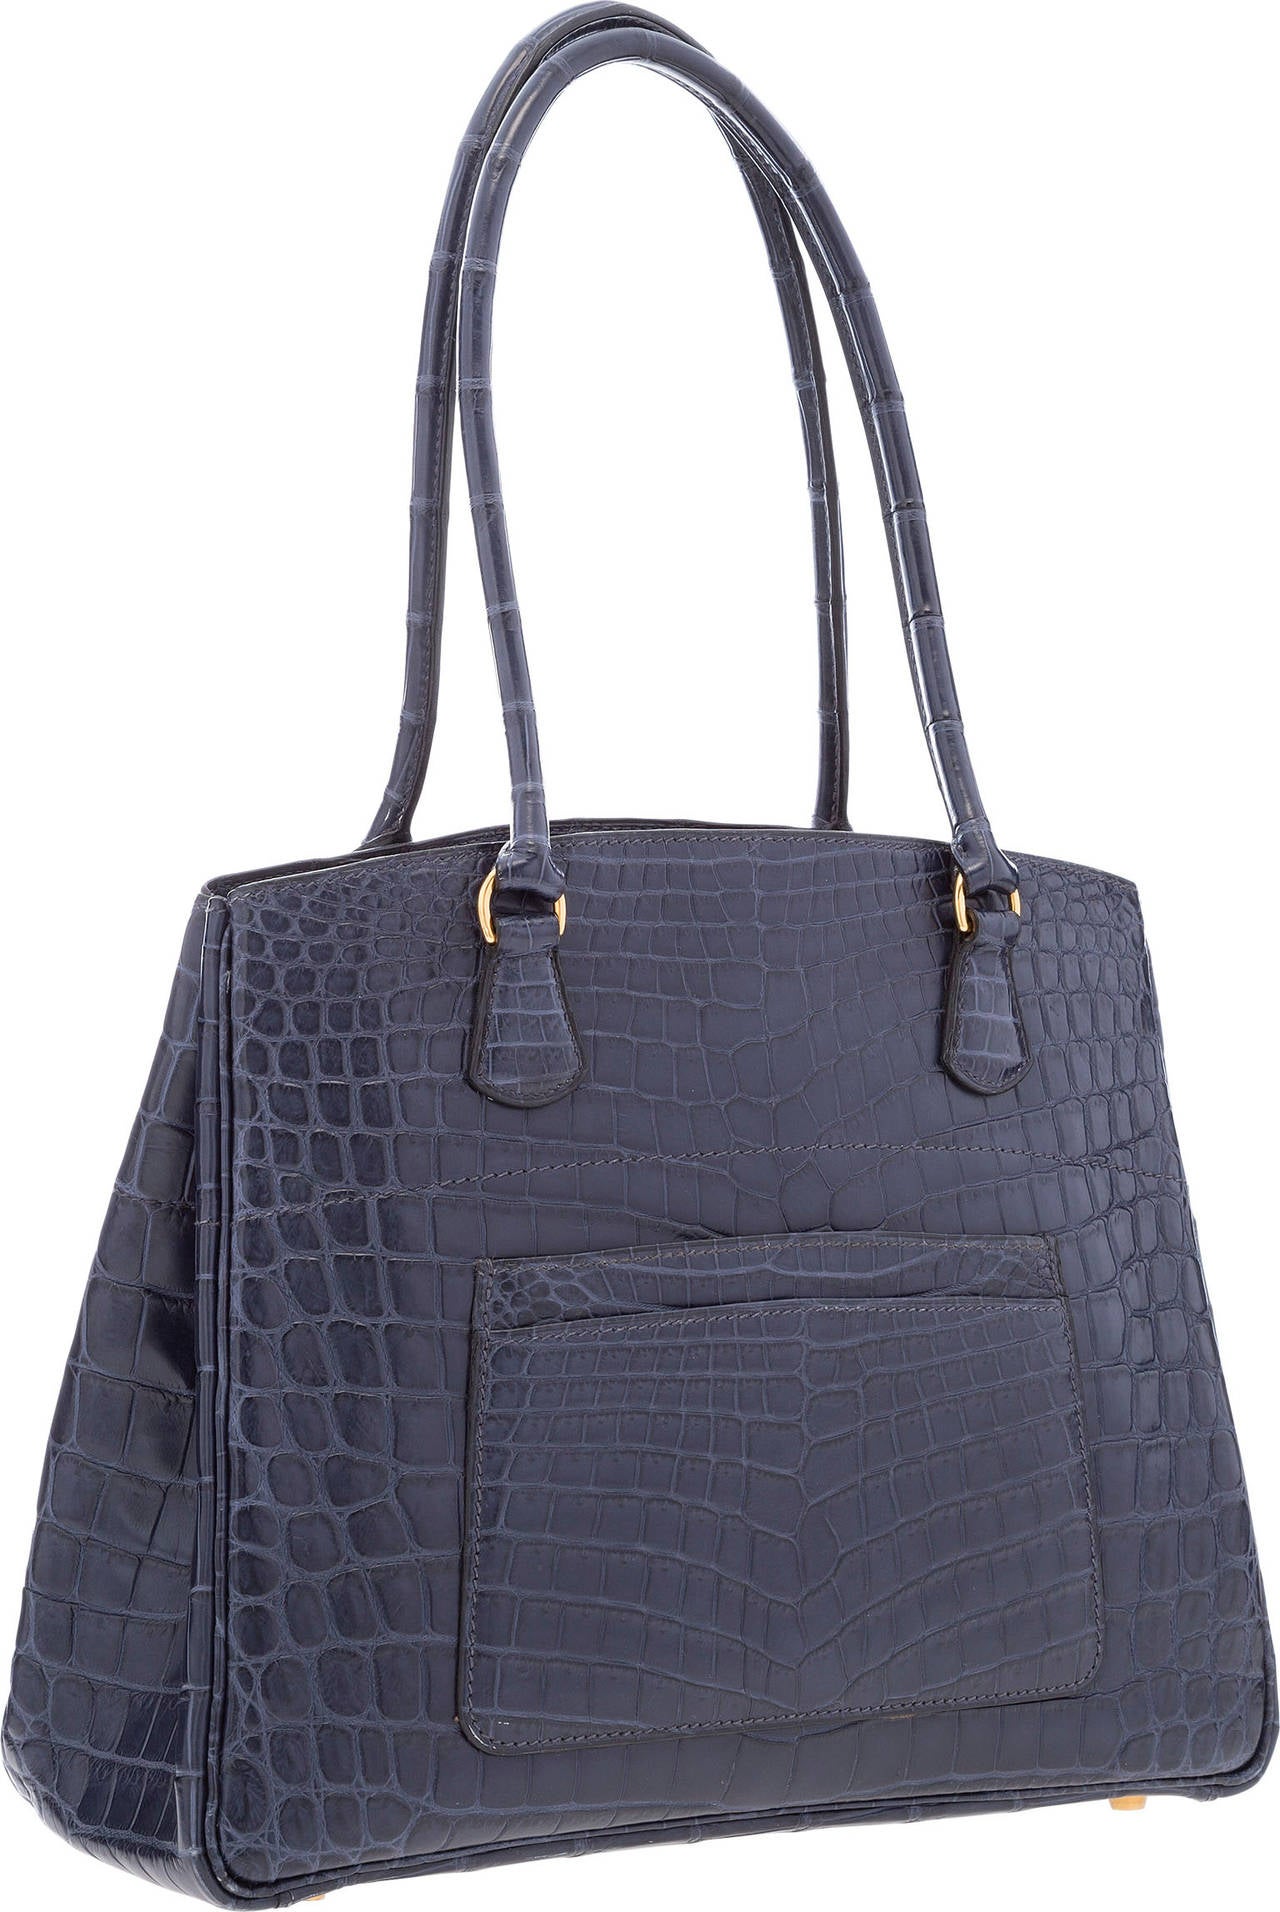 This Hermes bag is a chic and simplistic shoulder bag.  Done in Matte Indigo Nilo Crocodile, this bag's deep color make it a great option for day or night. This bag features two shoulder straps, two front exterior slip pockets, snaps on both sides